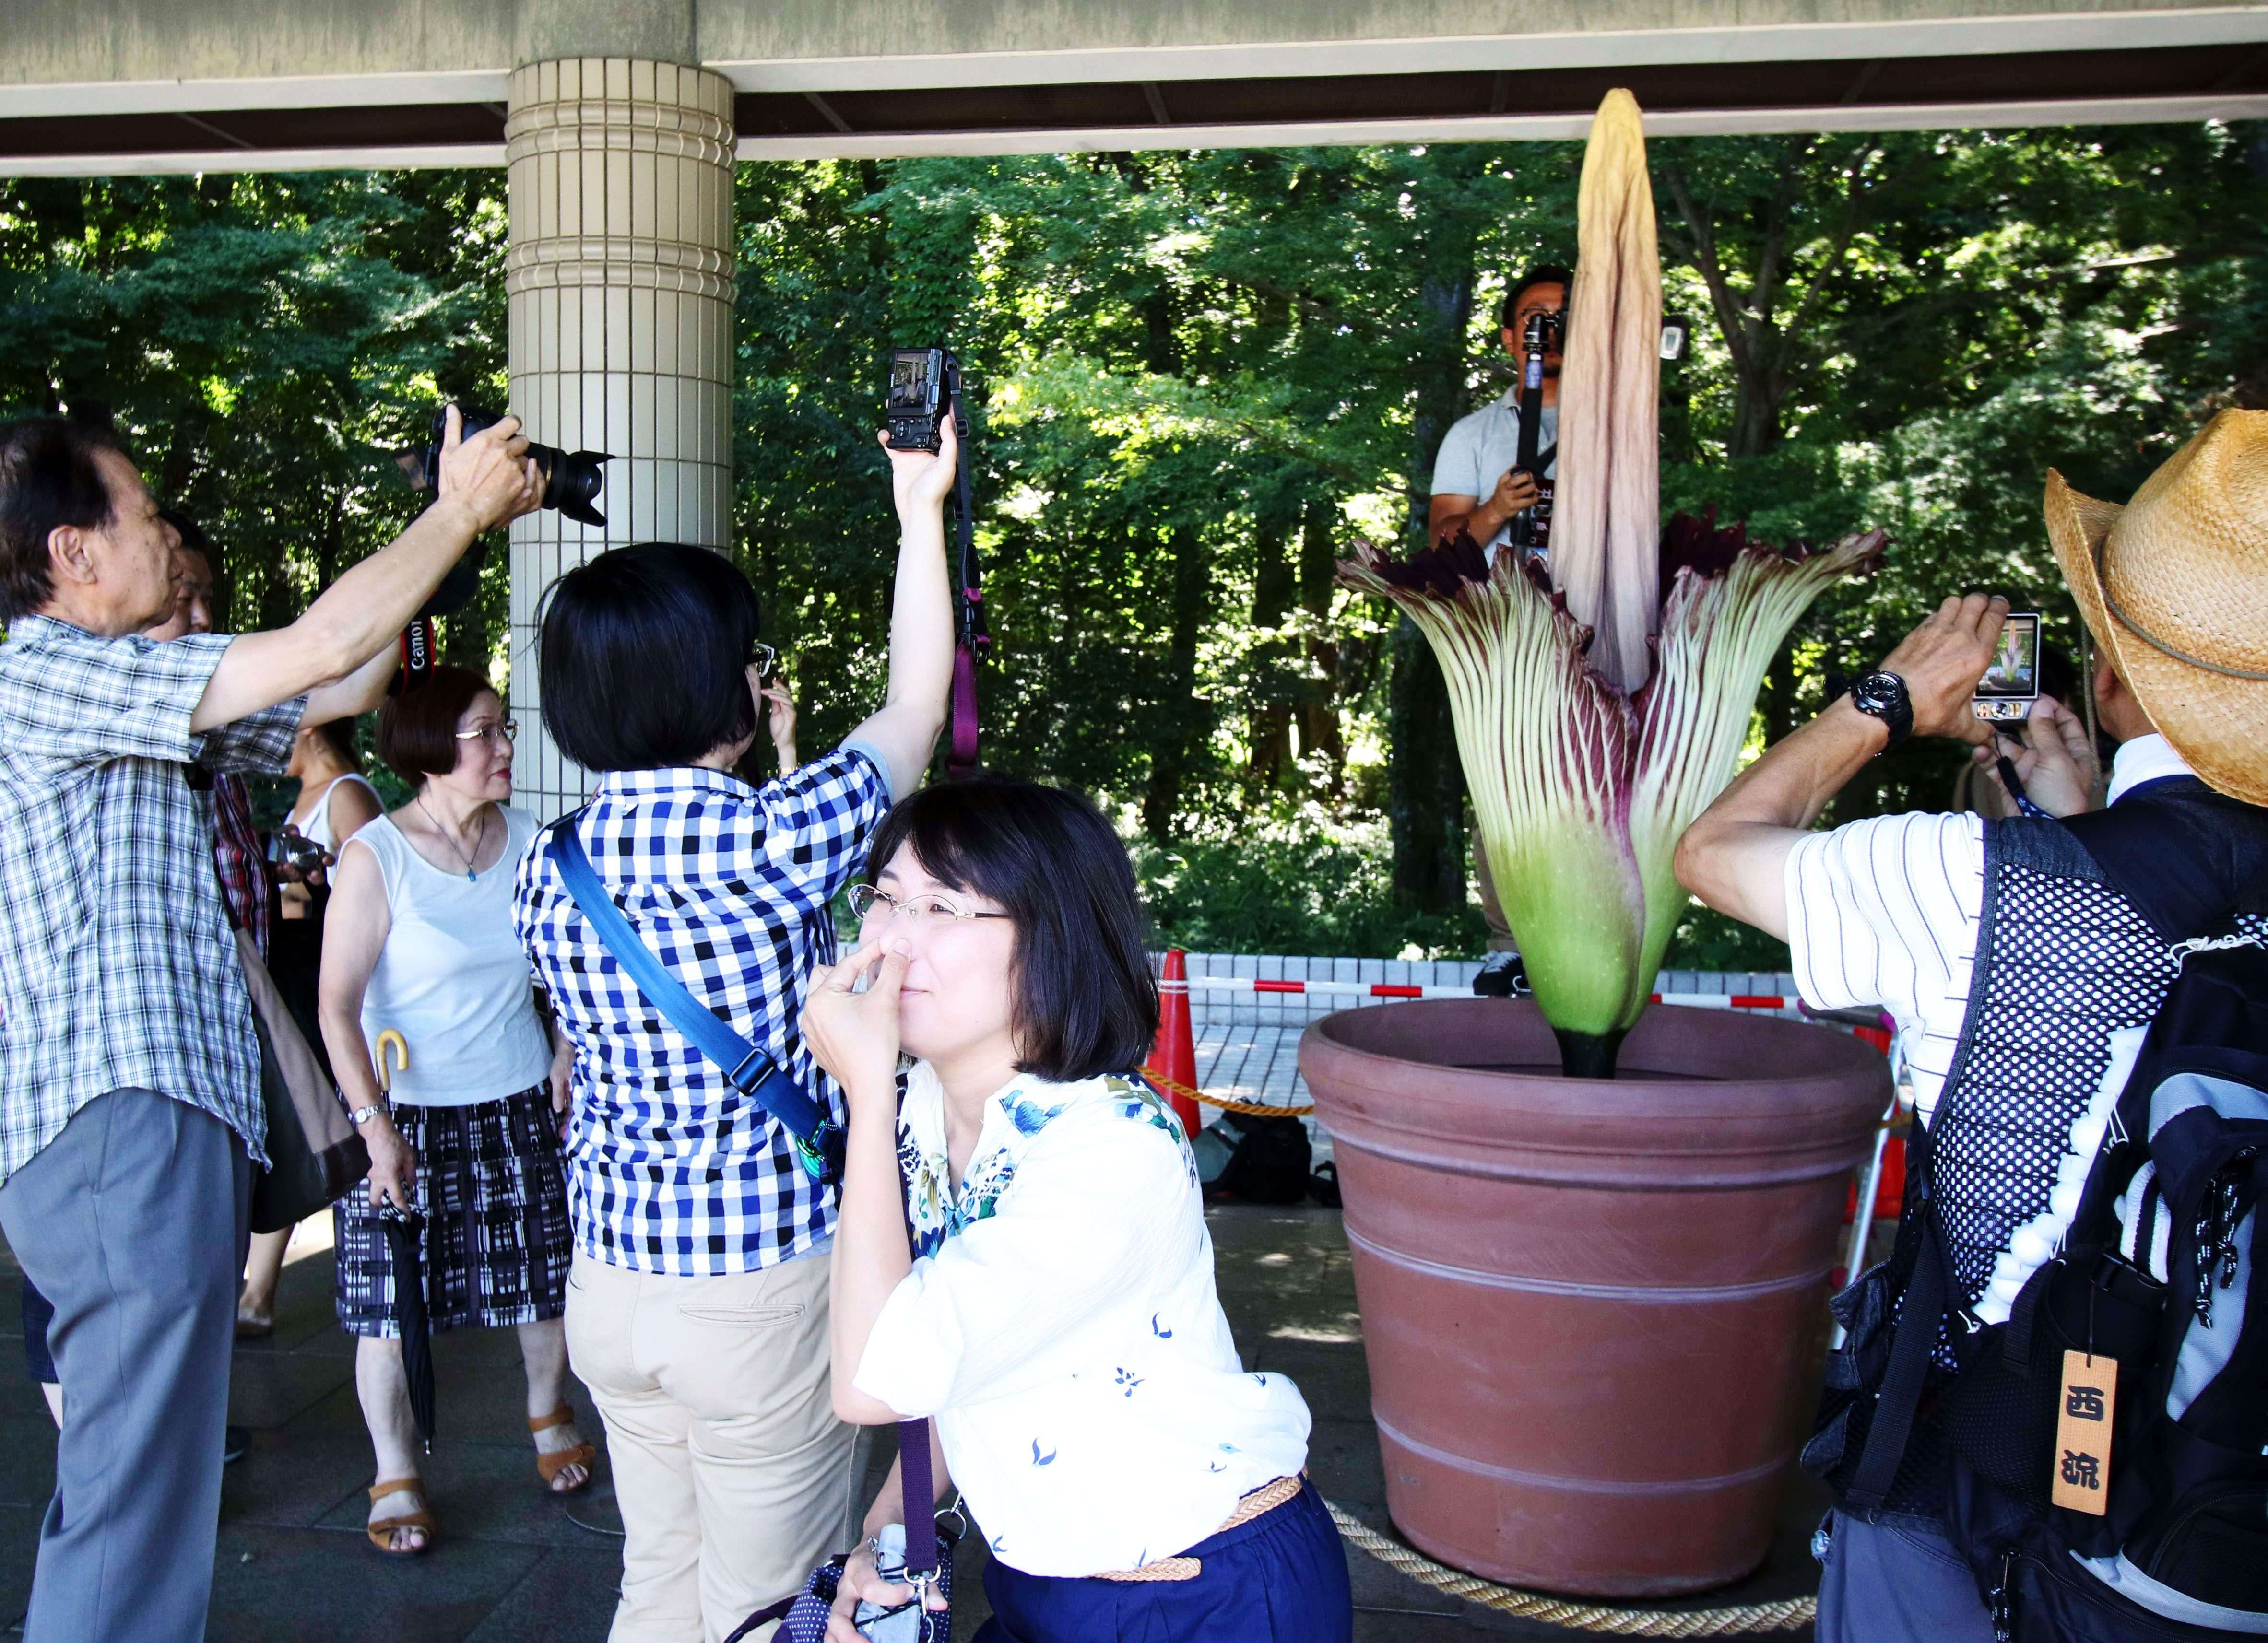 A woman reacts to the smell of the giant Titan Arum (Amorphophallus titanum) at the Jindai botanical gardens in Tokyo on July 22, 2015 after the flower started to bloom on July 21. The Indonesian plant has the world's largest blossom, standing 1.9 metres in height and smelling like decaying flesh to attract beetles. Hundreds of visitors queued to watch the rare flower which opens for only one or two days.   AFP PHOTO / Yoshikazu TSUNO